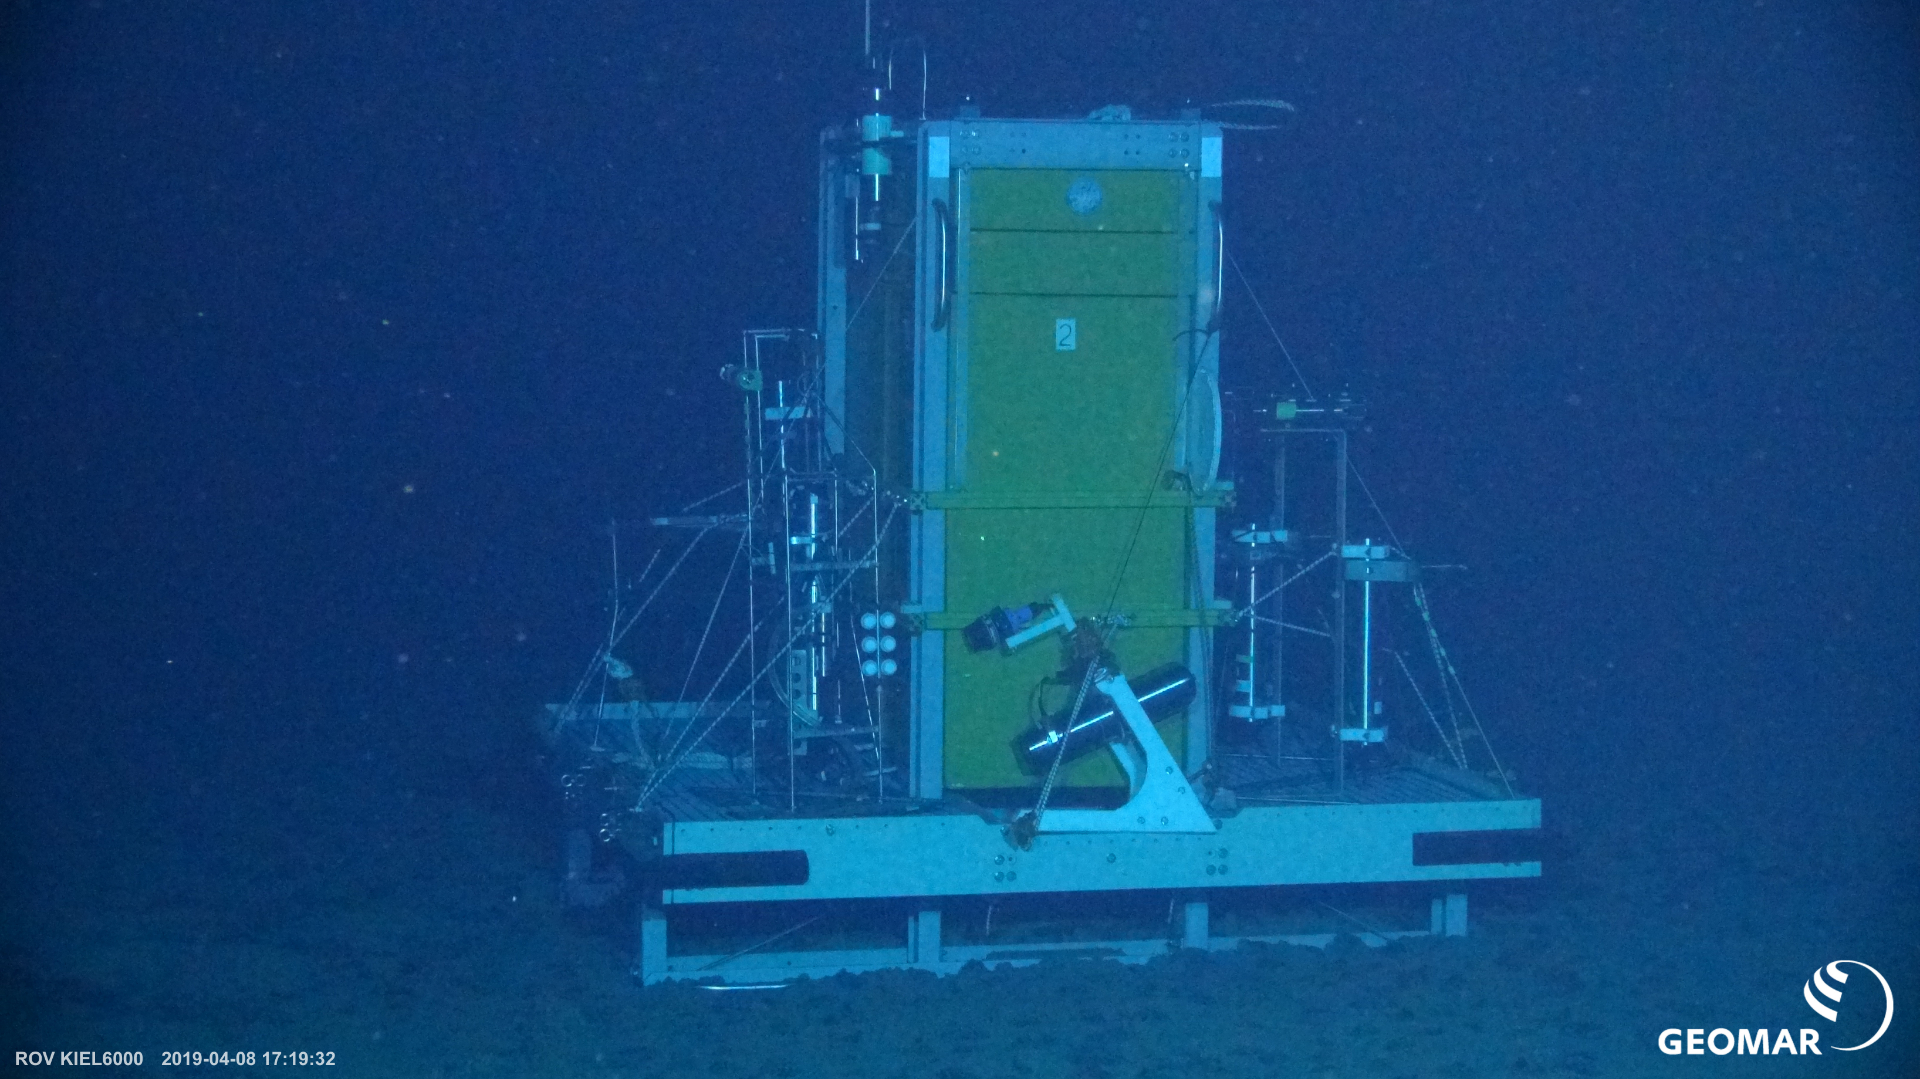 The ‘Elevator’ of GEOMAR, delivering a load of sensor platforms and time-lapse camera to the seabed. After completing a deep-sea experiment, the ROV KIel 6000 brings all equipment back to the elevator. Photo: ROV Kiel 6000, GEOMAR